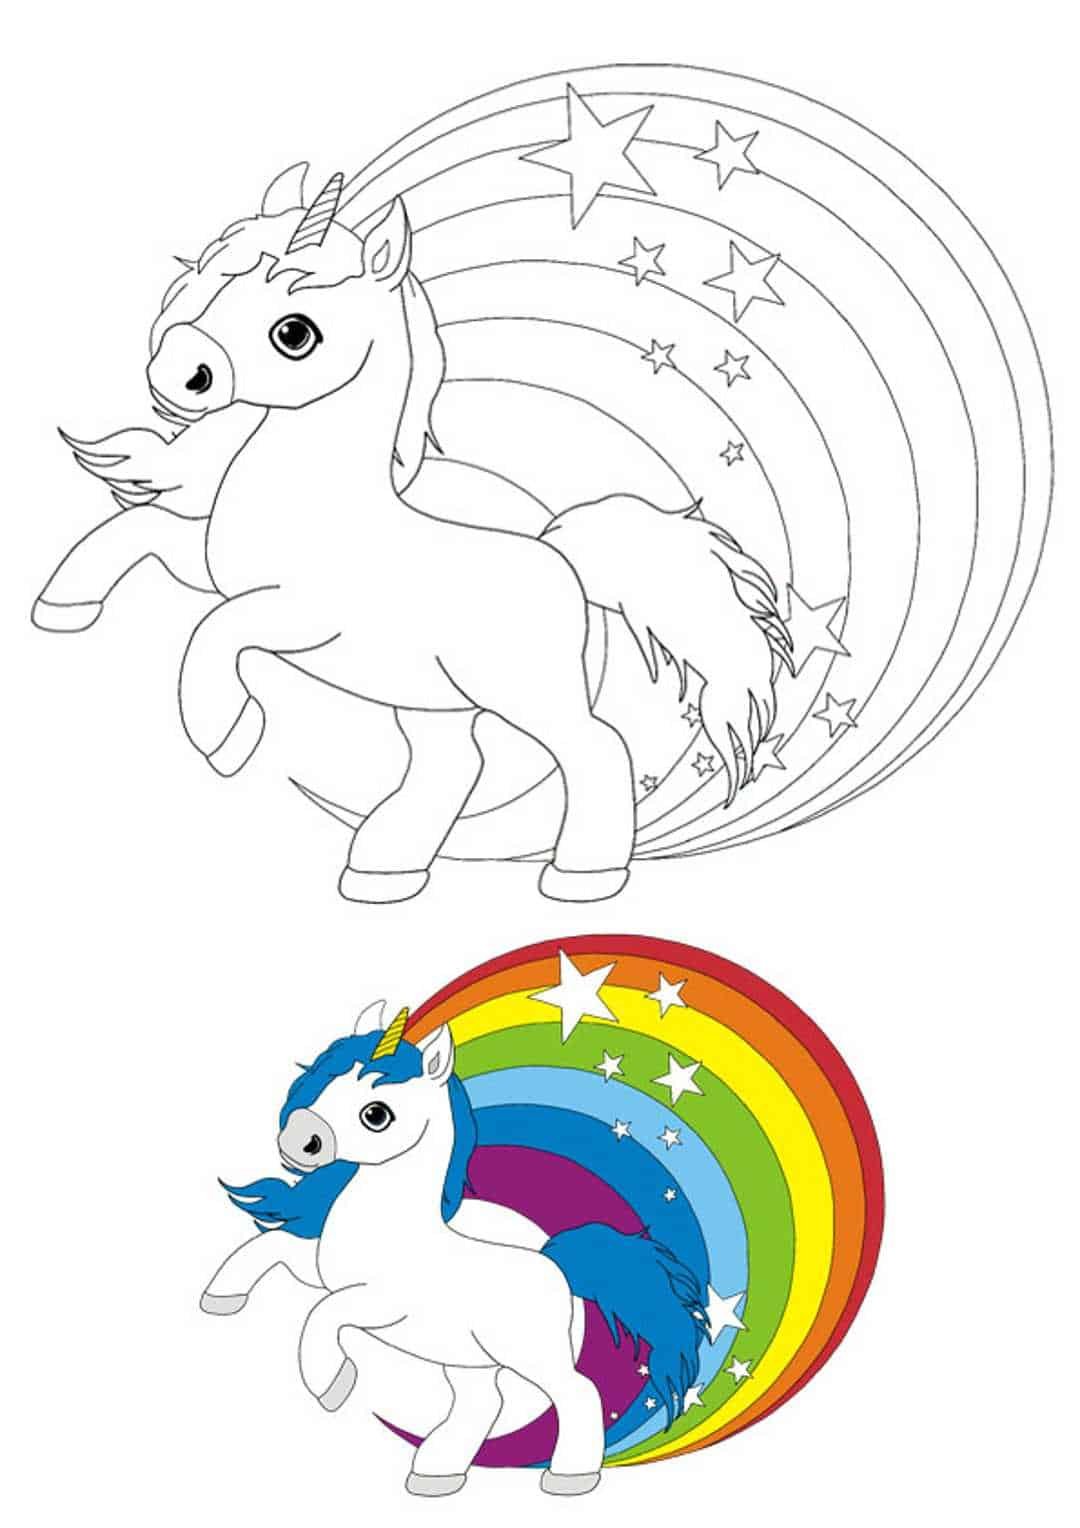 Little cute unicorn rainbow coloring page with sample